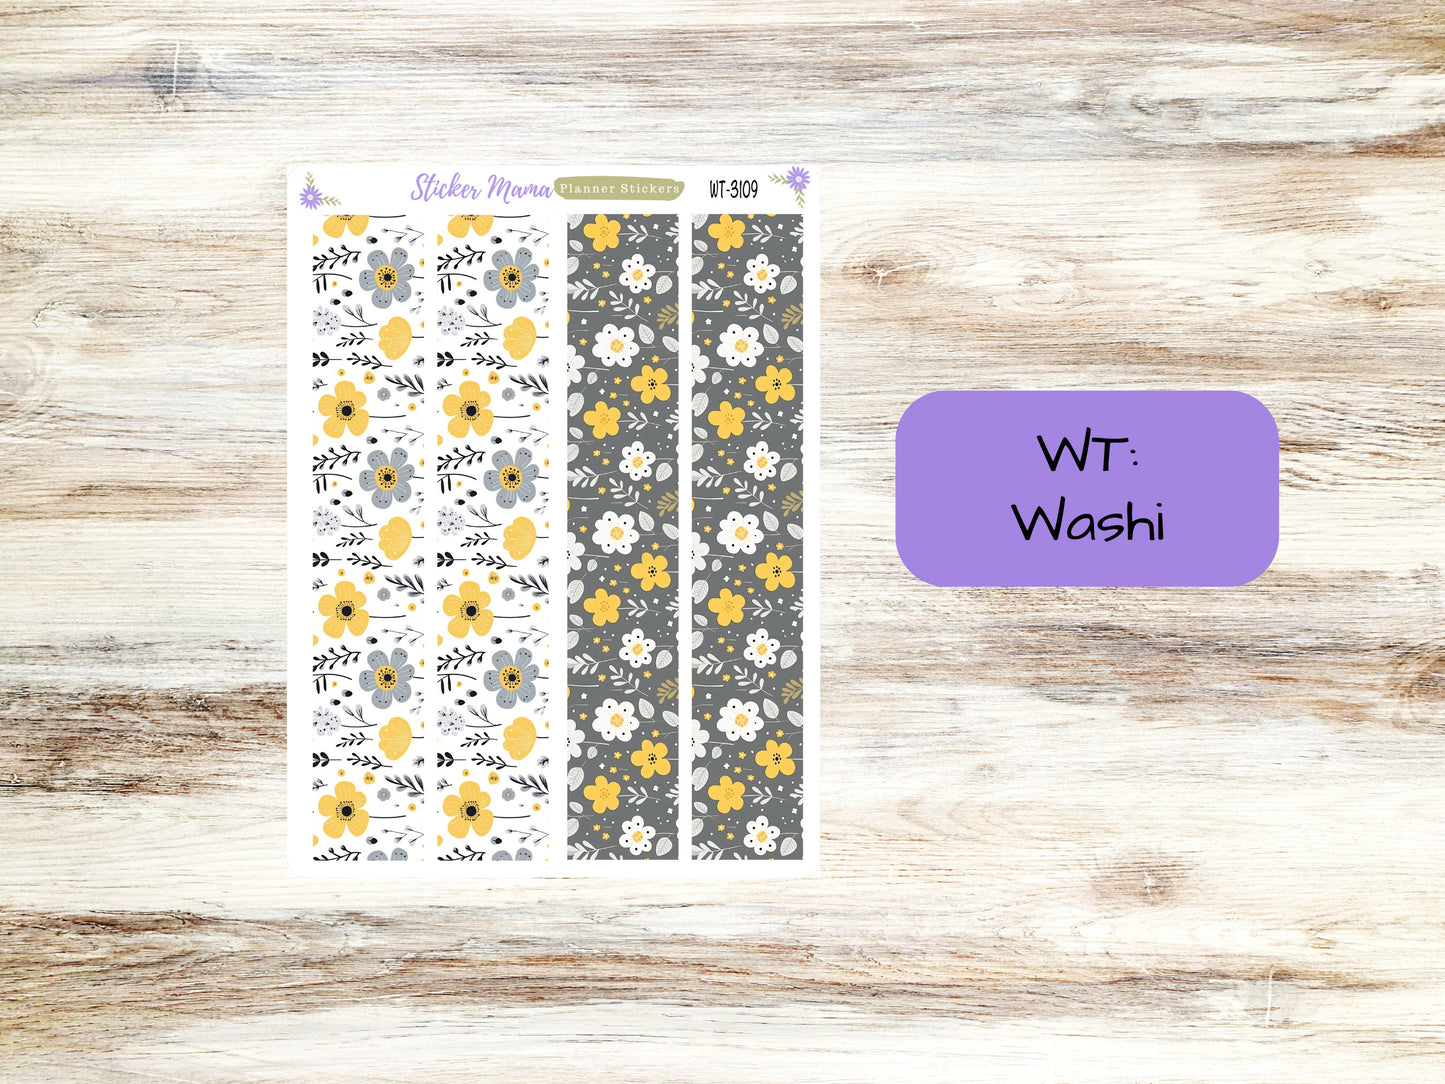 WASHI PLANNER STICKERS || 3109 || Grey and Yellow Floral || Washi Stickers || Planner Stickers || Washi for Planners